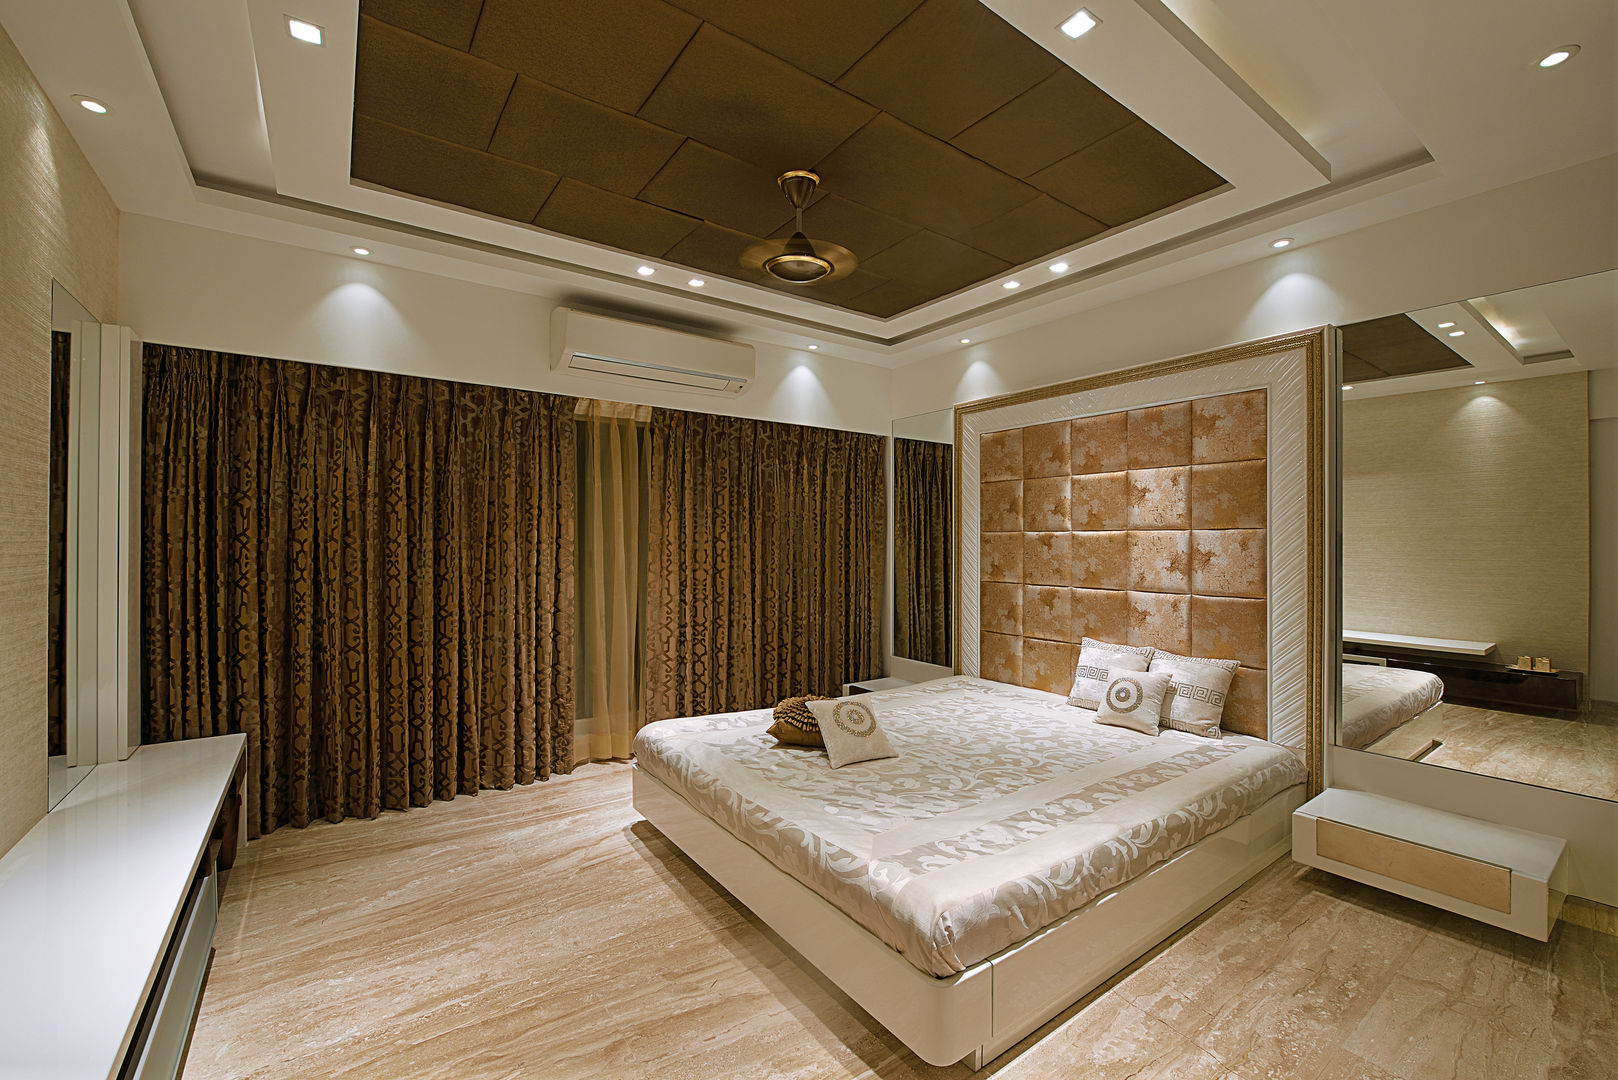 Residence at Khar, Milind Pai - Architects & Interior Designers Milind Pai - Architects & Interior Designers Bedroom